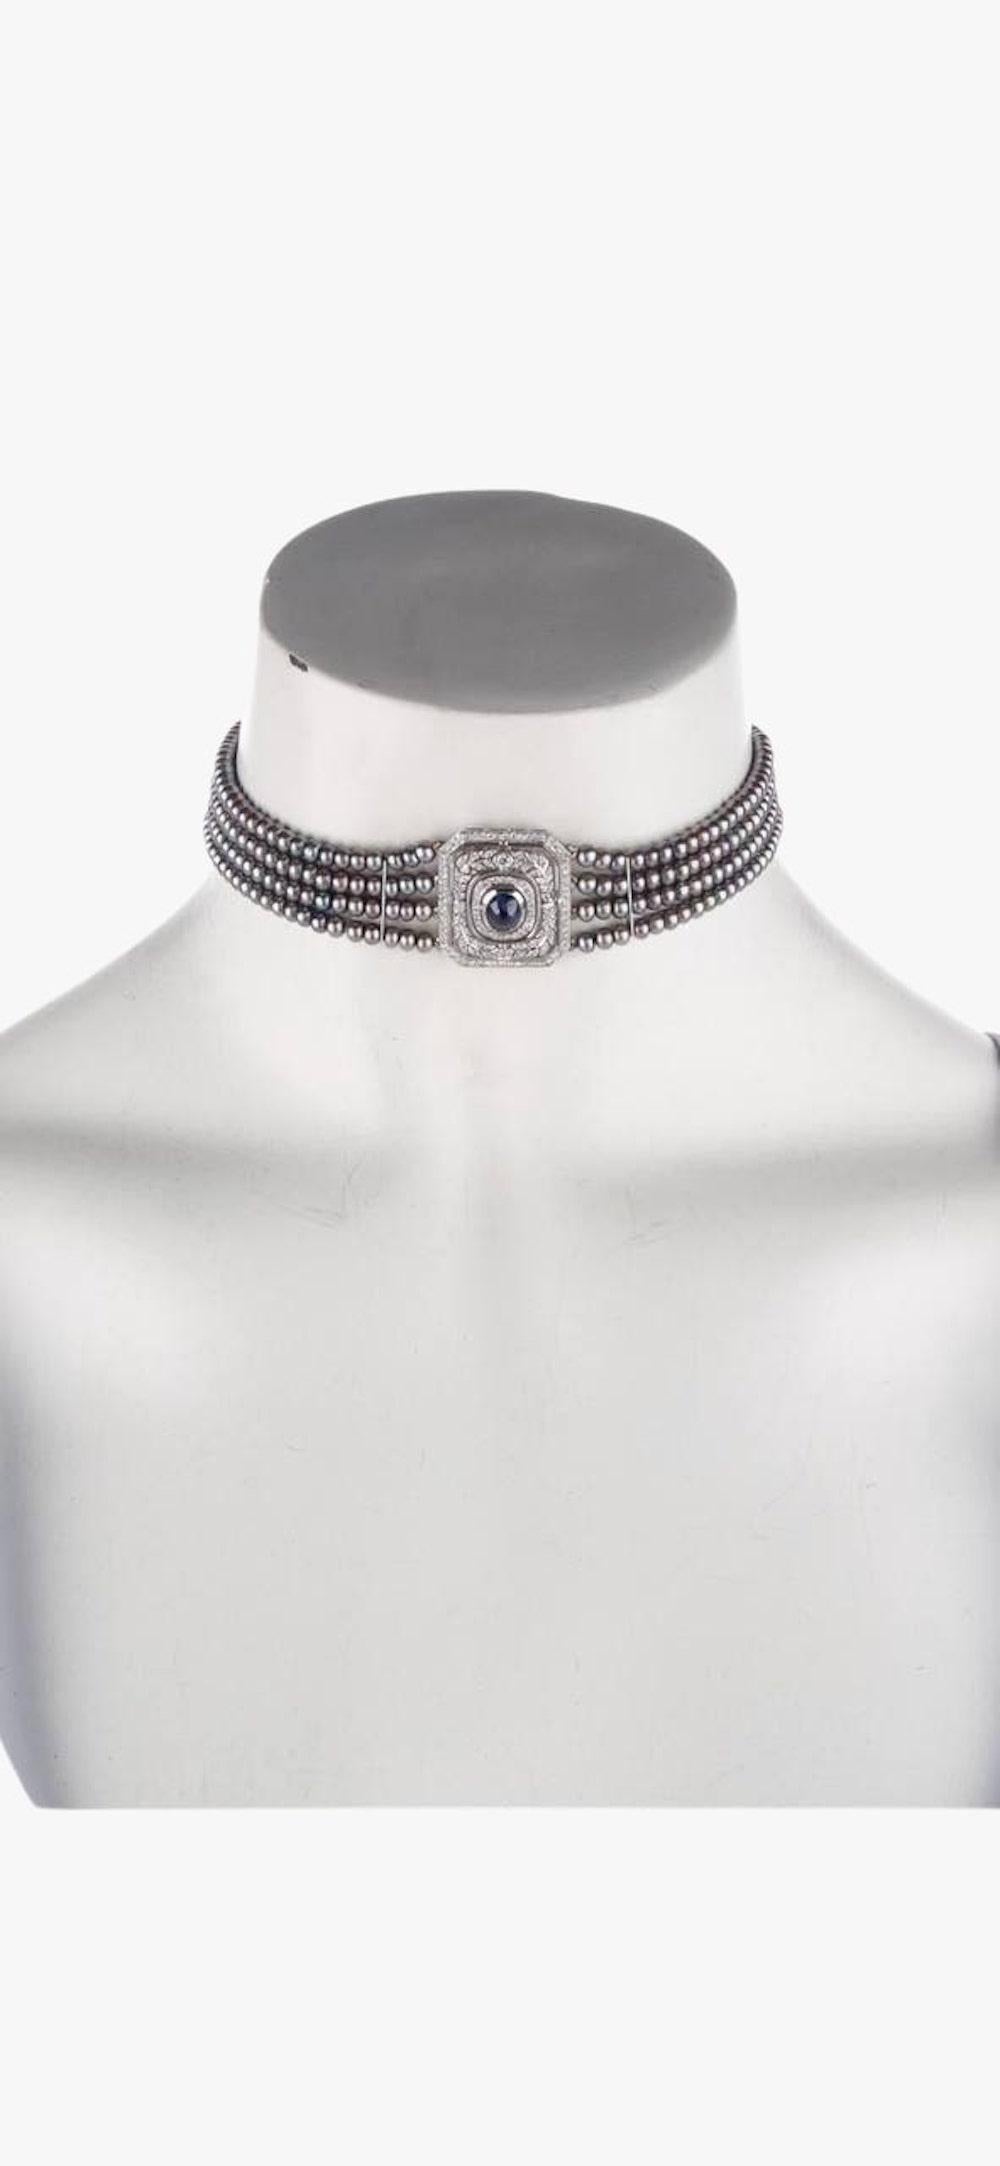 Vintage multistrand 14K White Gold necklace made of grey dyed cultured pearls and diamonds set centered with a sapphire cabochon. 
Gemstone: Diamond
Carat Weight: 0.93
Stone Count: 114
Stone Shape: Round